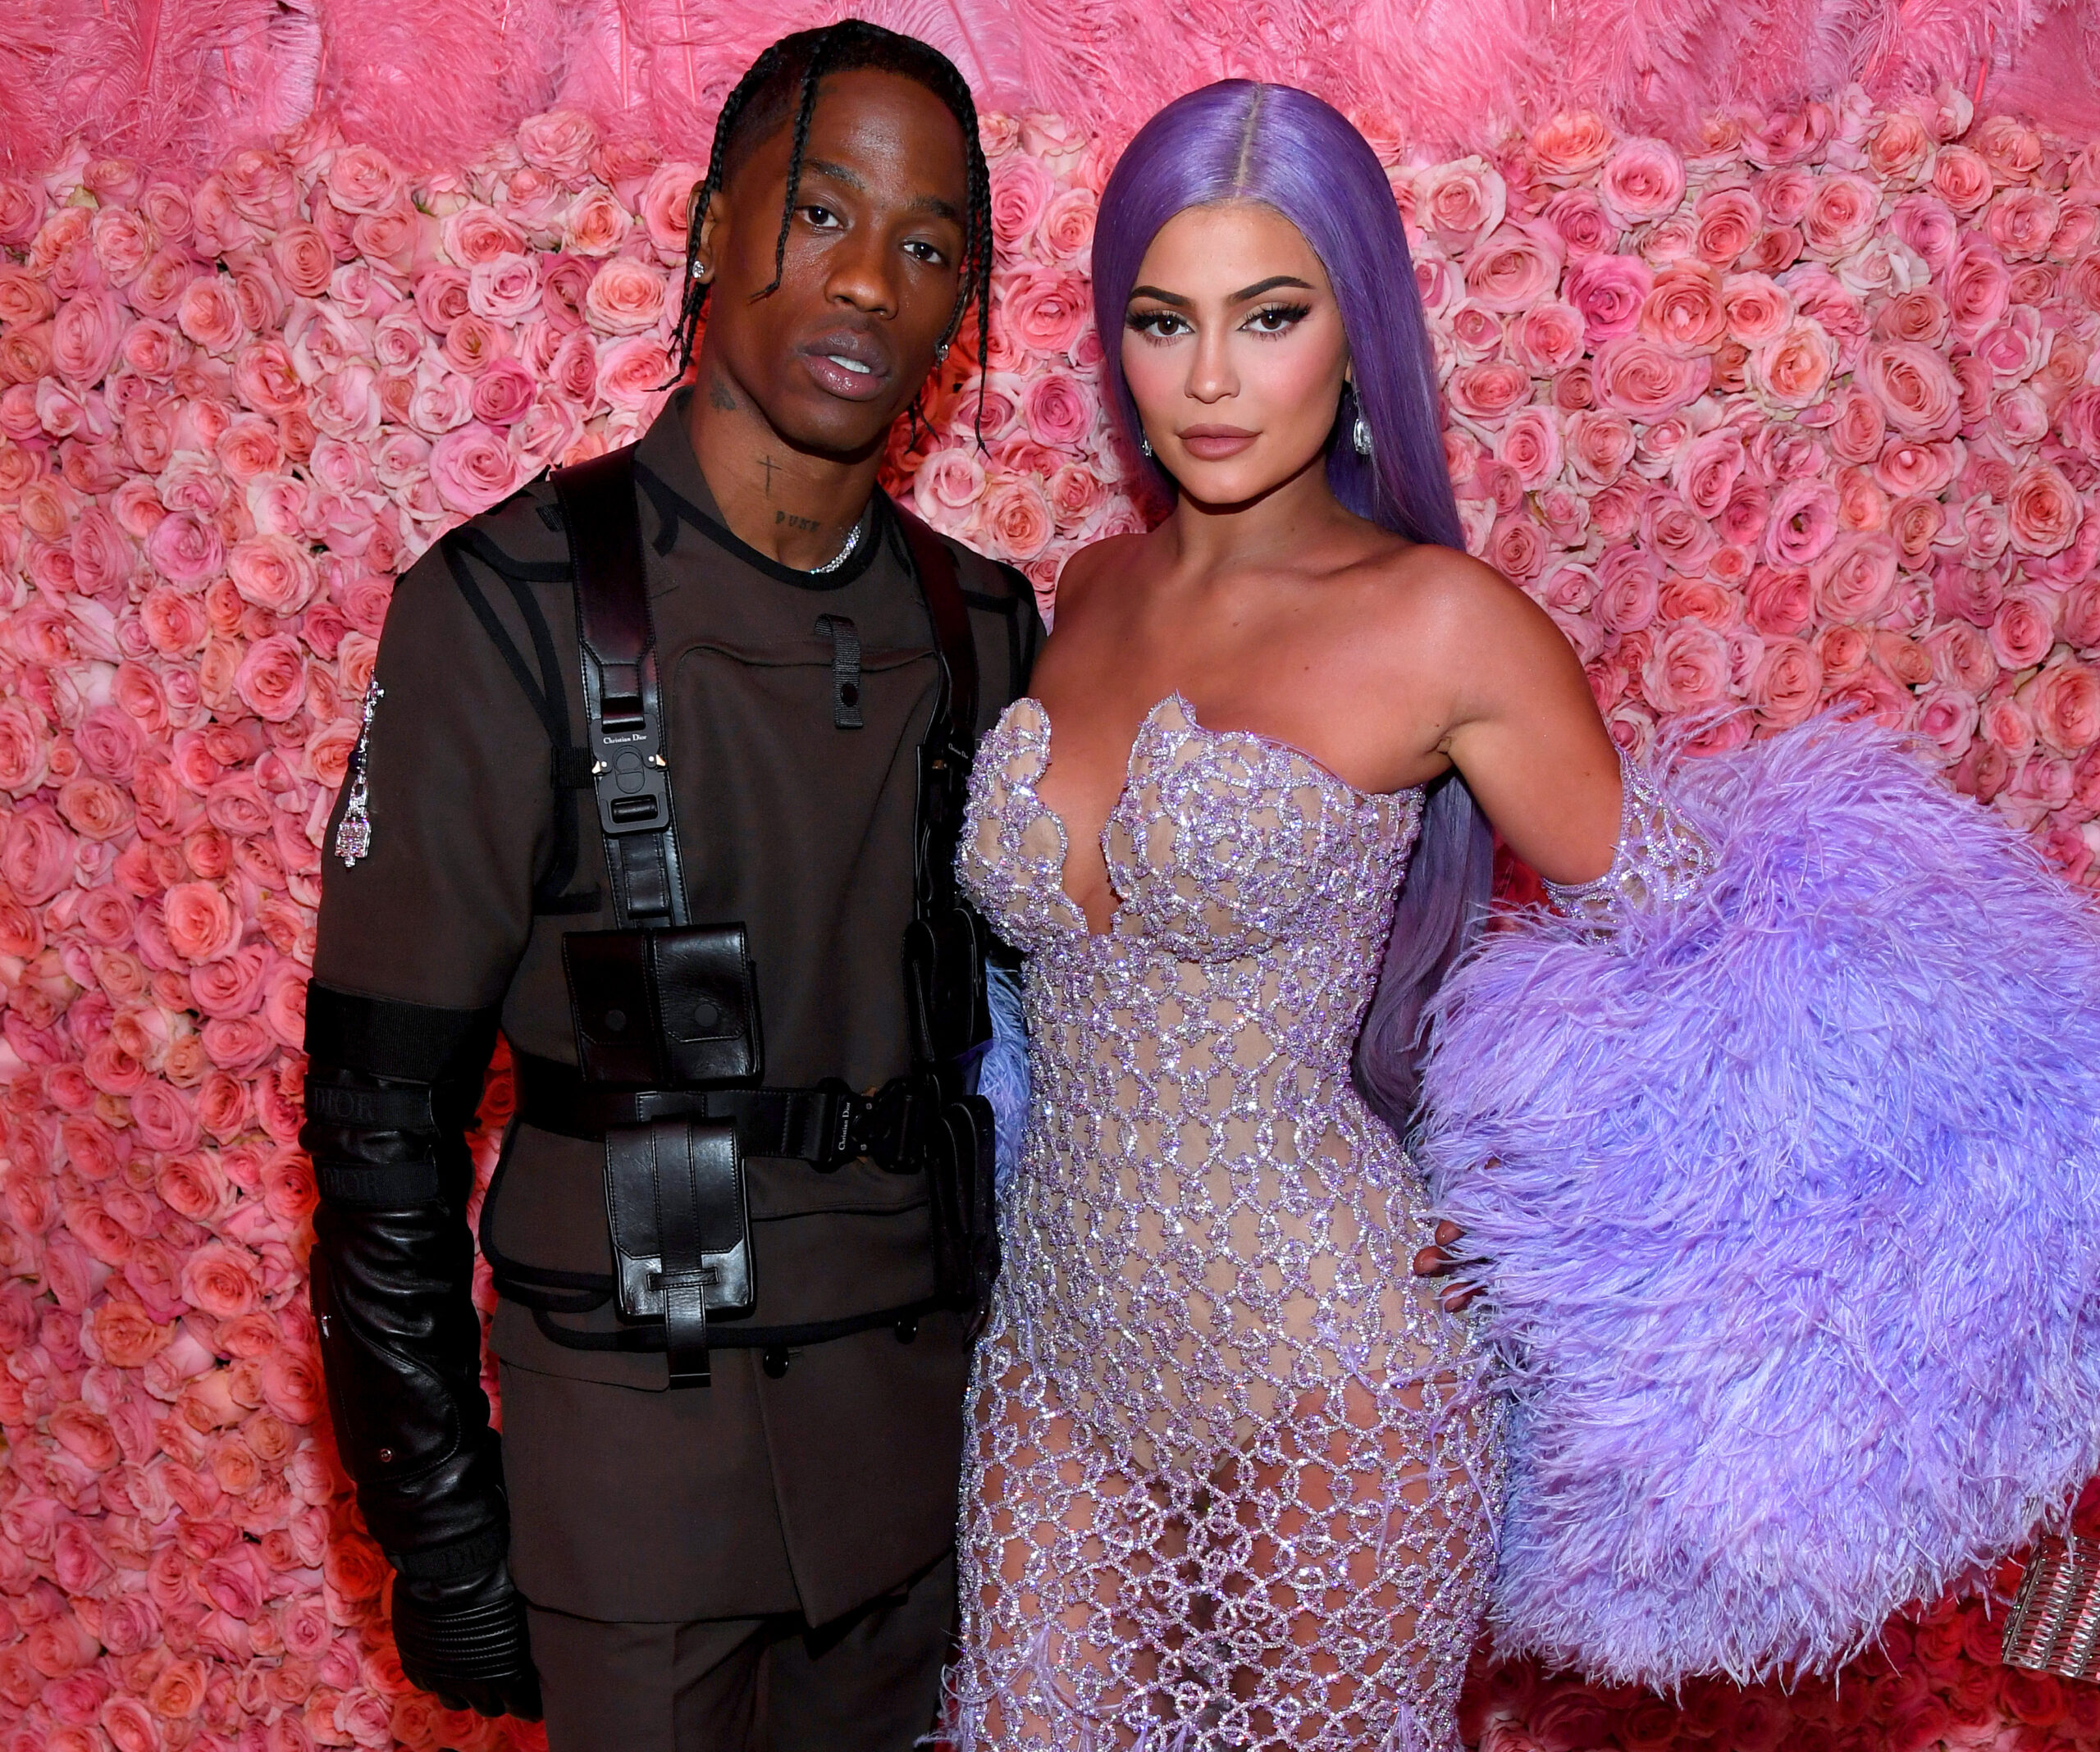 BREAKING: Kylie Jenner and Travis Scott have reportedly broken up